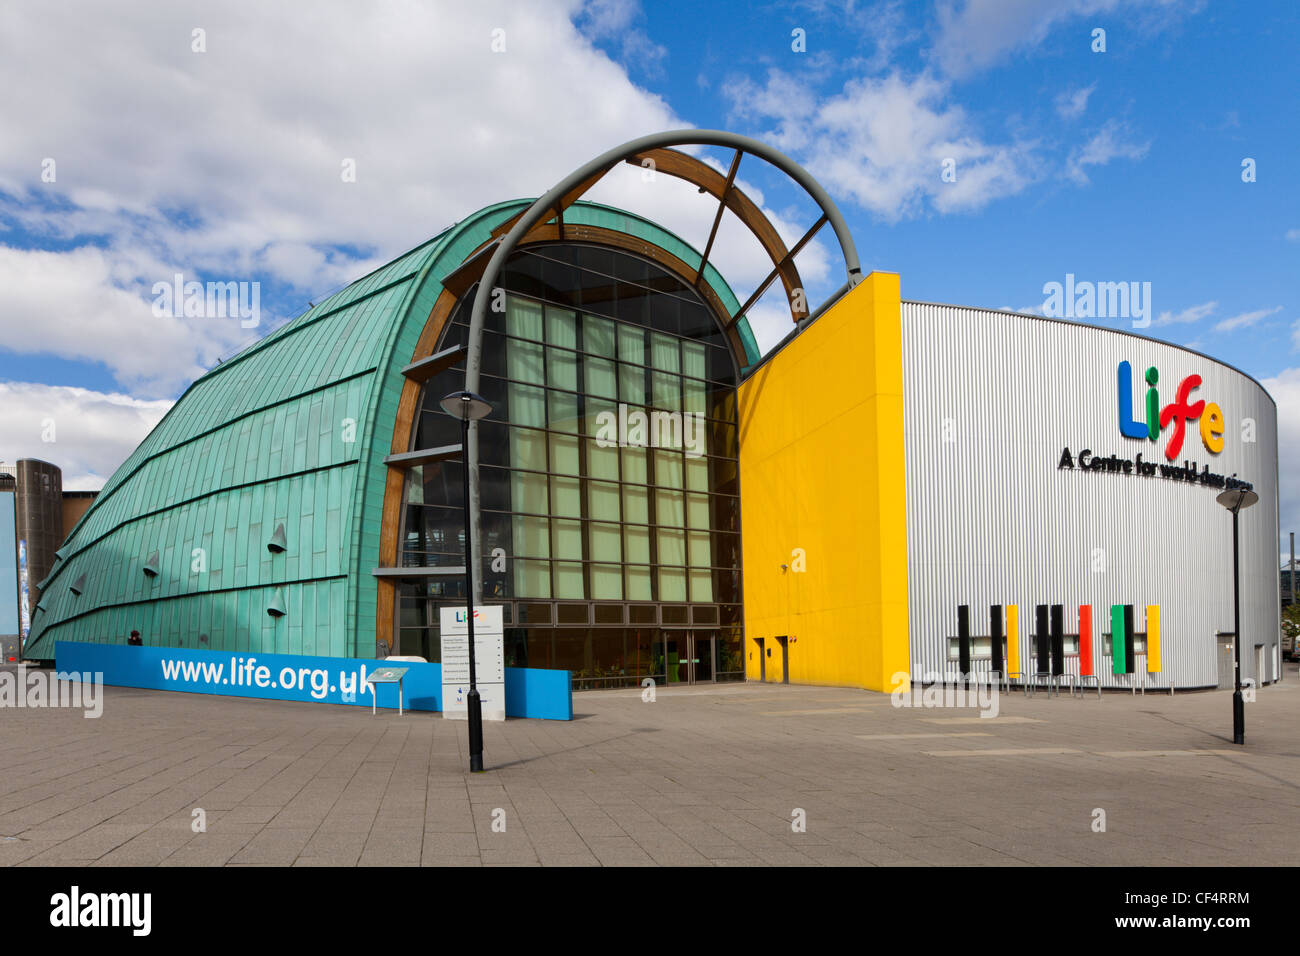 The exterior of Life, an award-winning science centre for all ages. Stock Photo